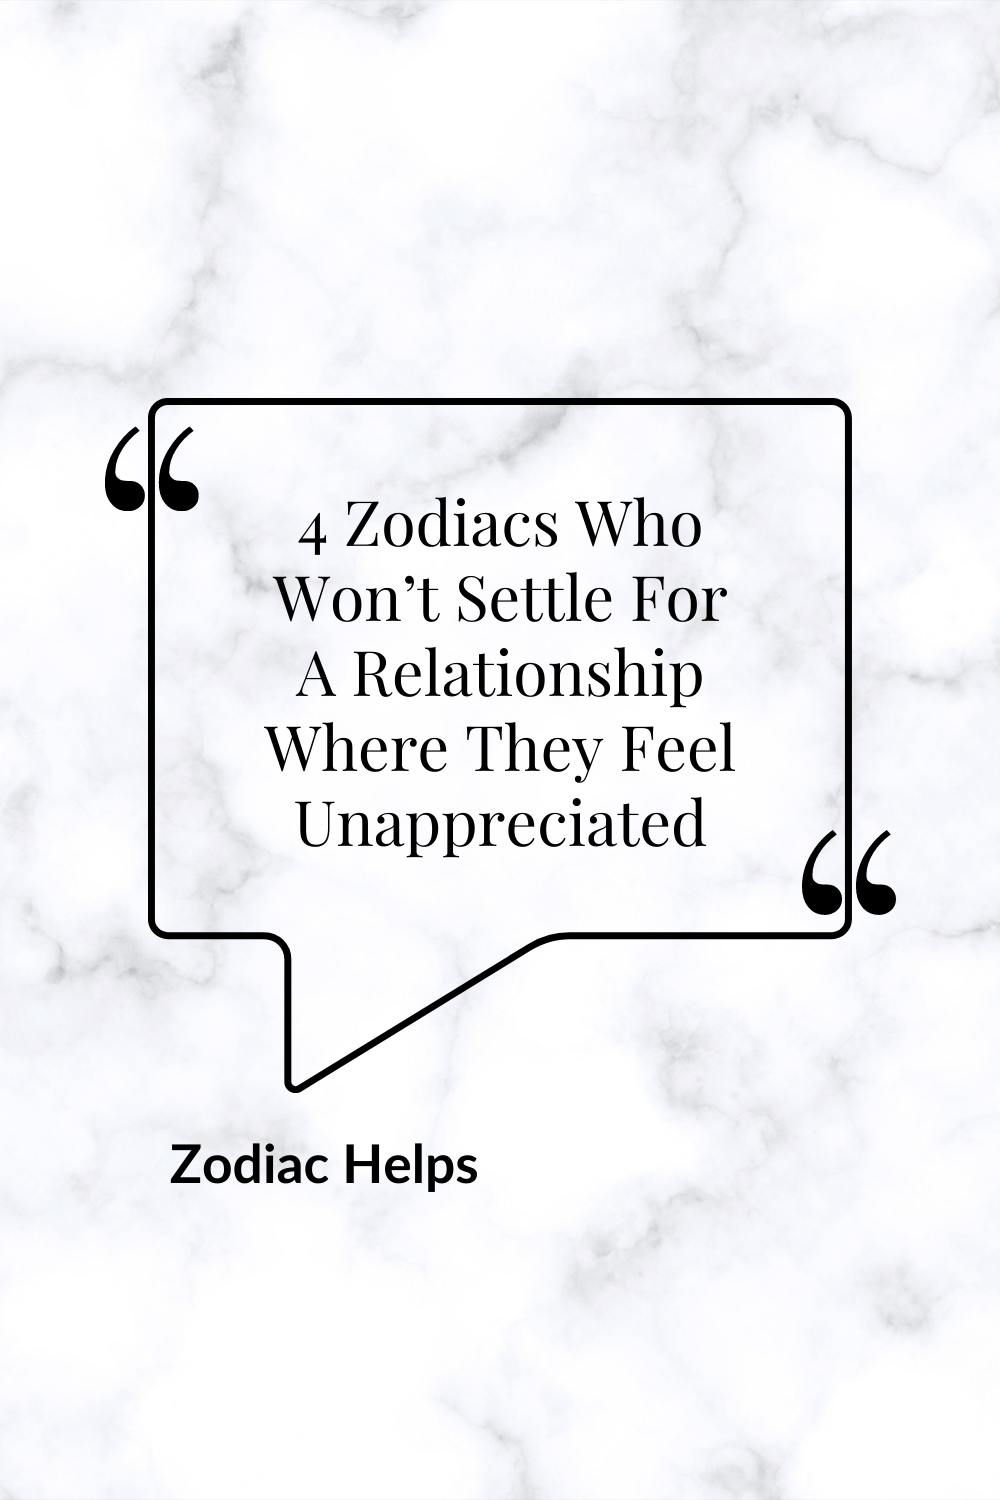 4 Zodiacs Who Won’t Settle For A Relationship Where They Feel Unappreciated